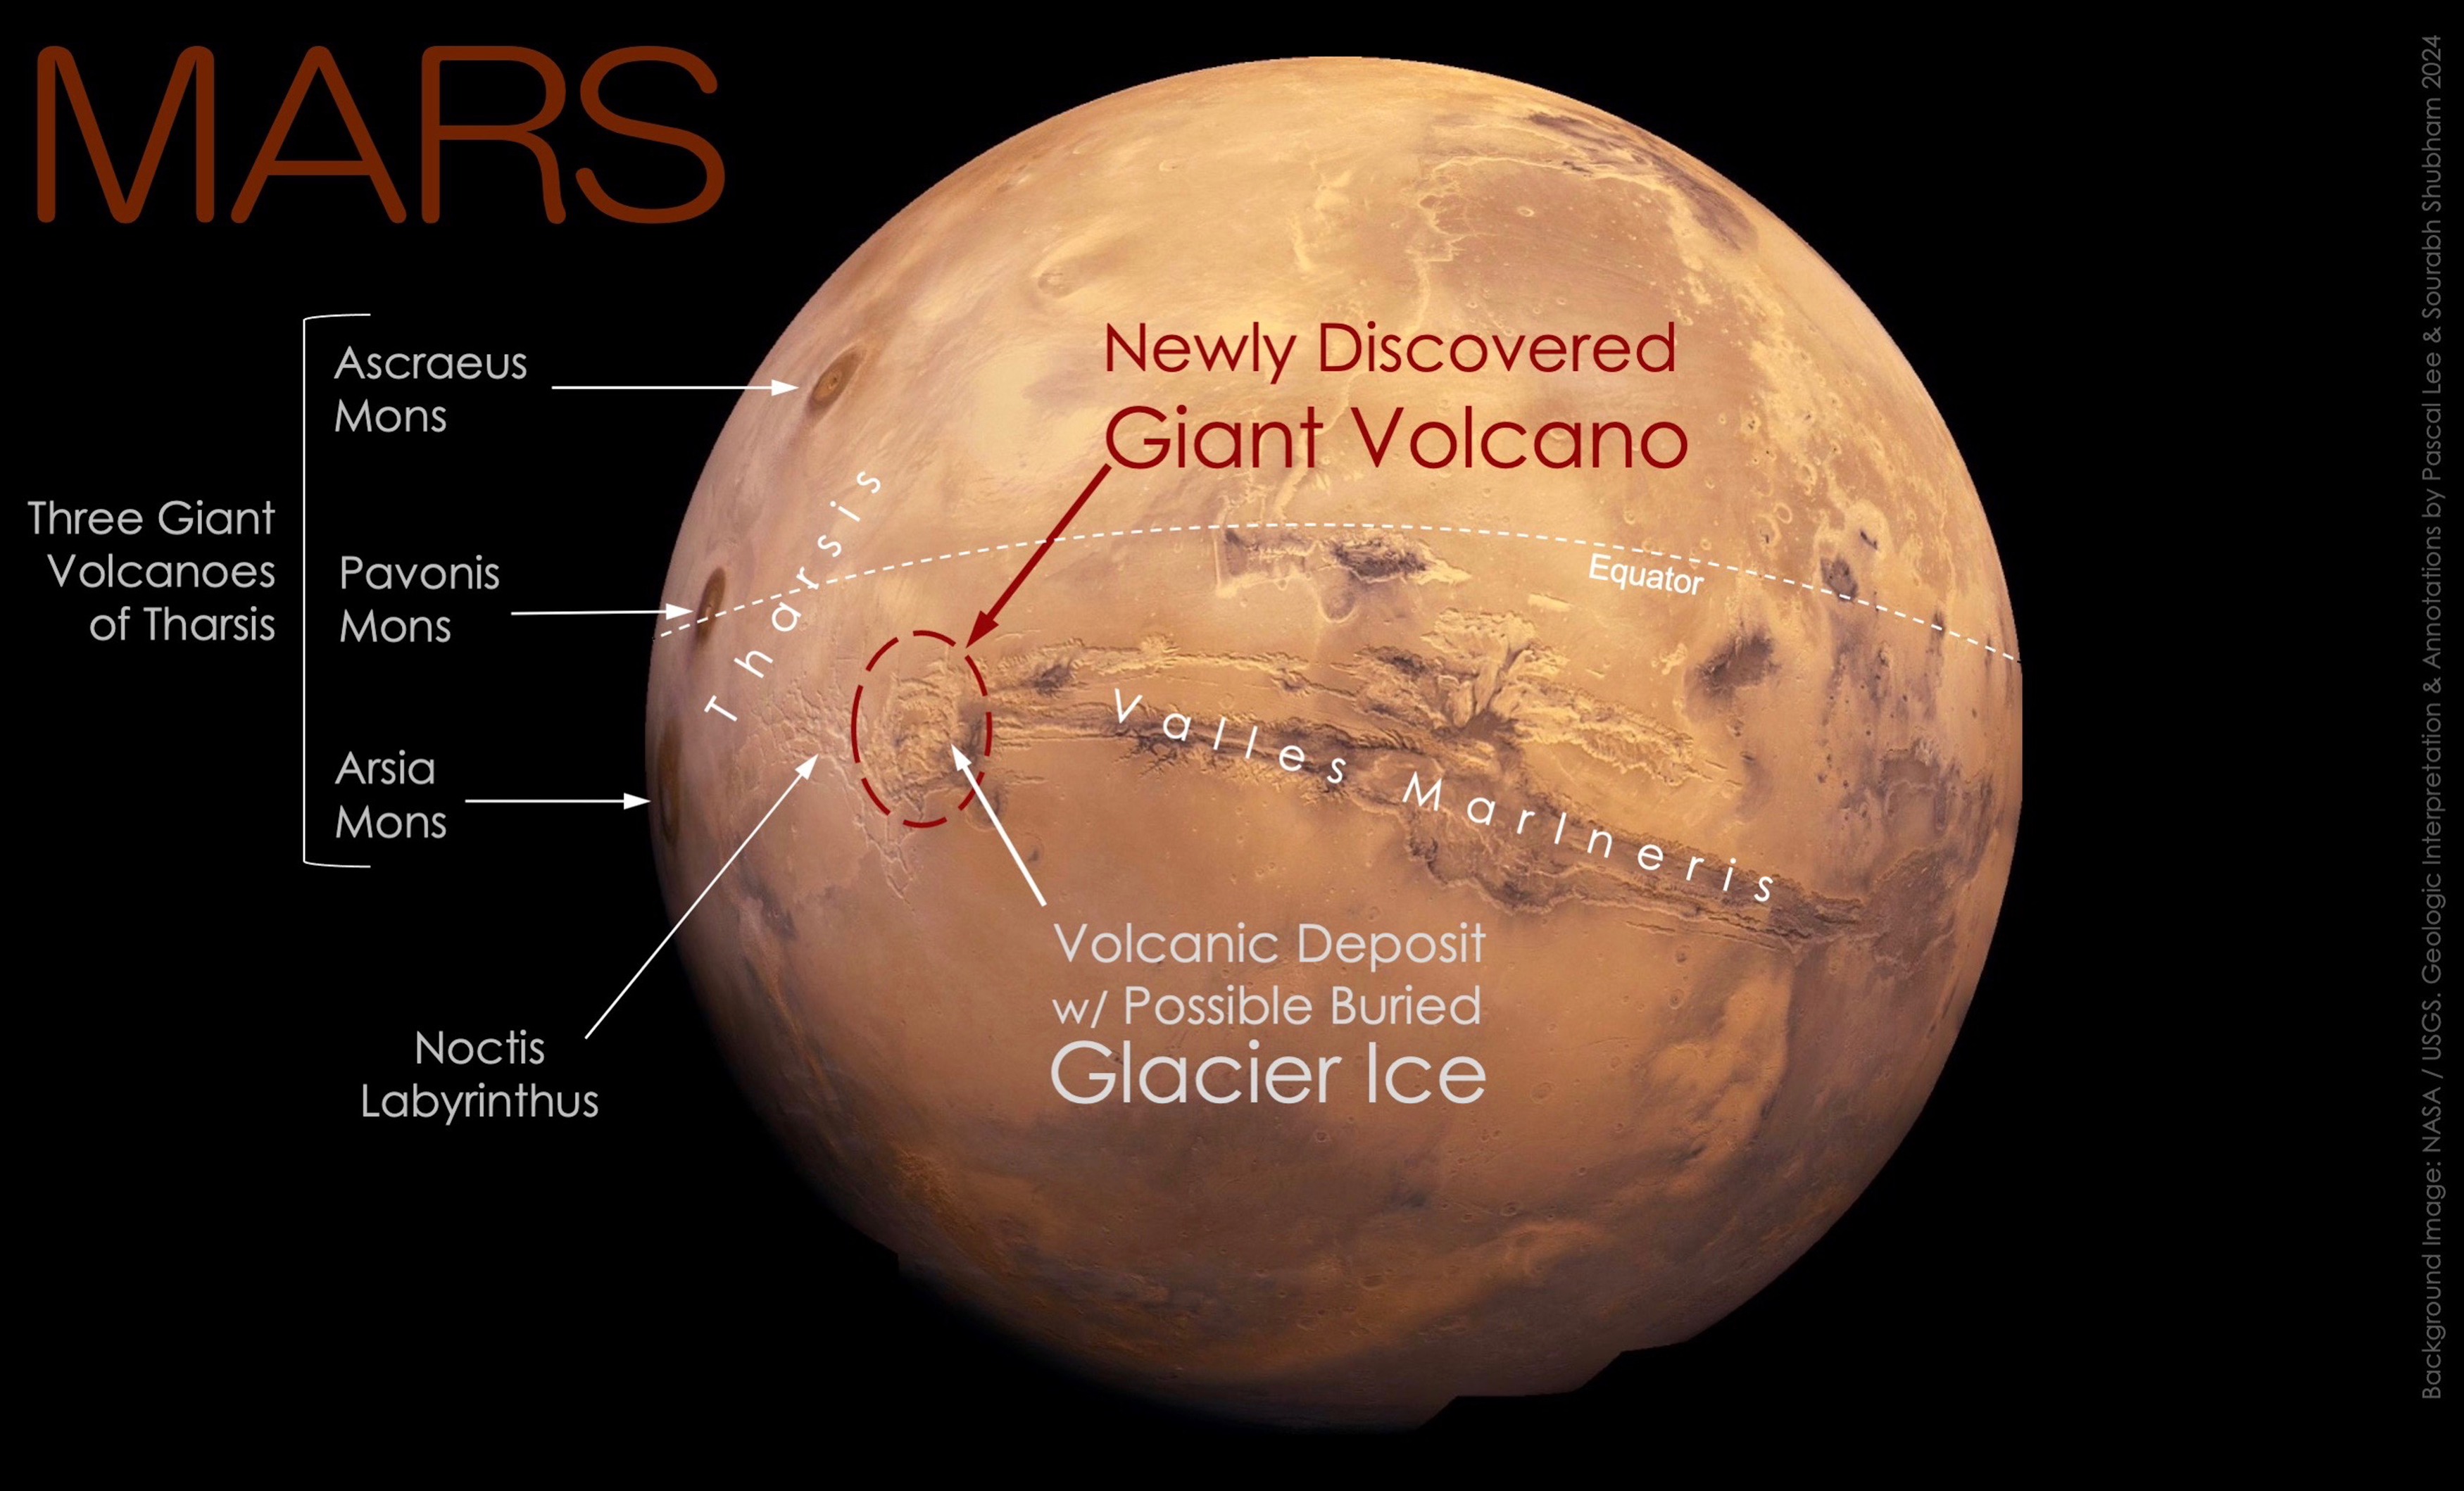 A giant volcano hiding in plain sight in one of Mars’ most iconic regions.